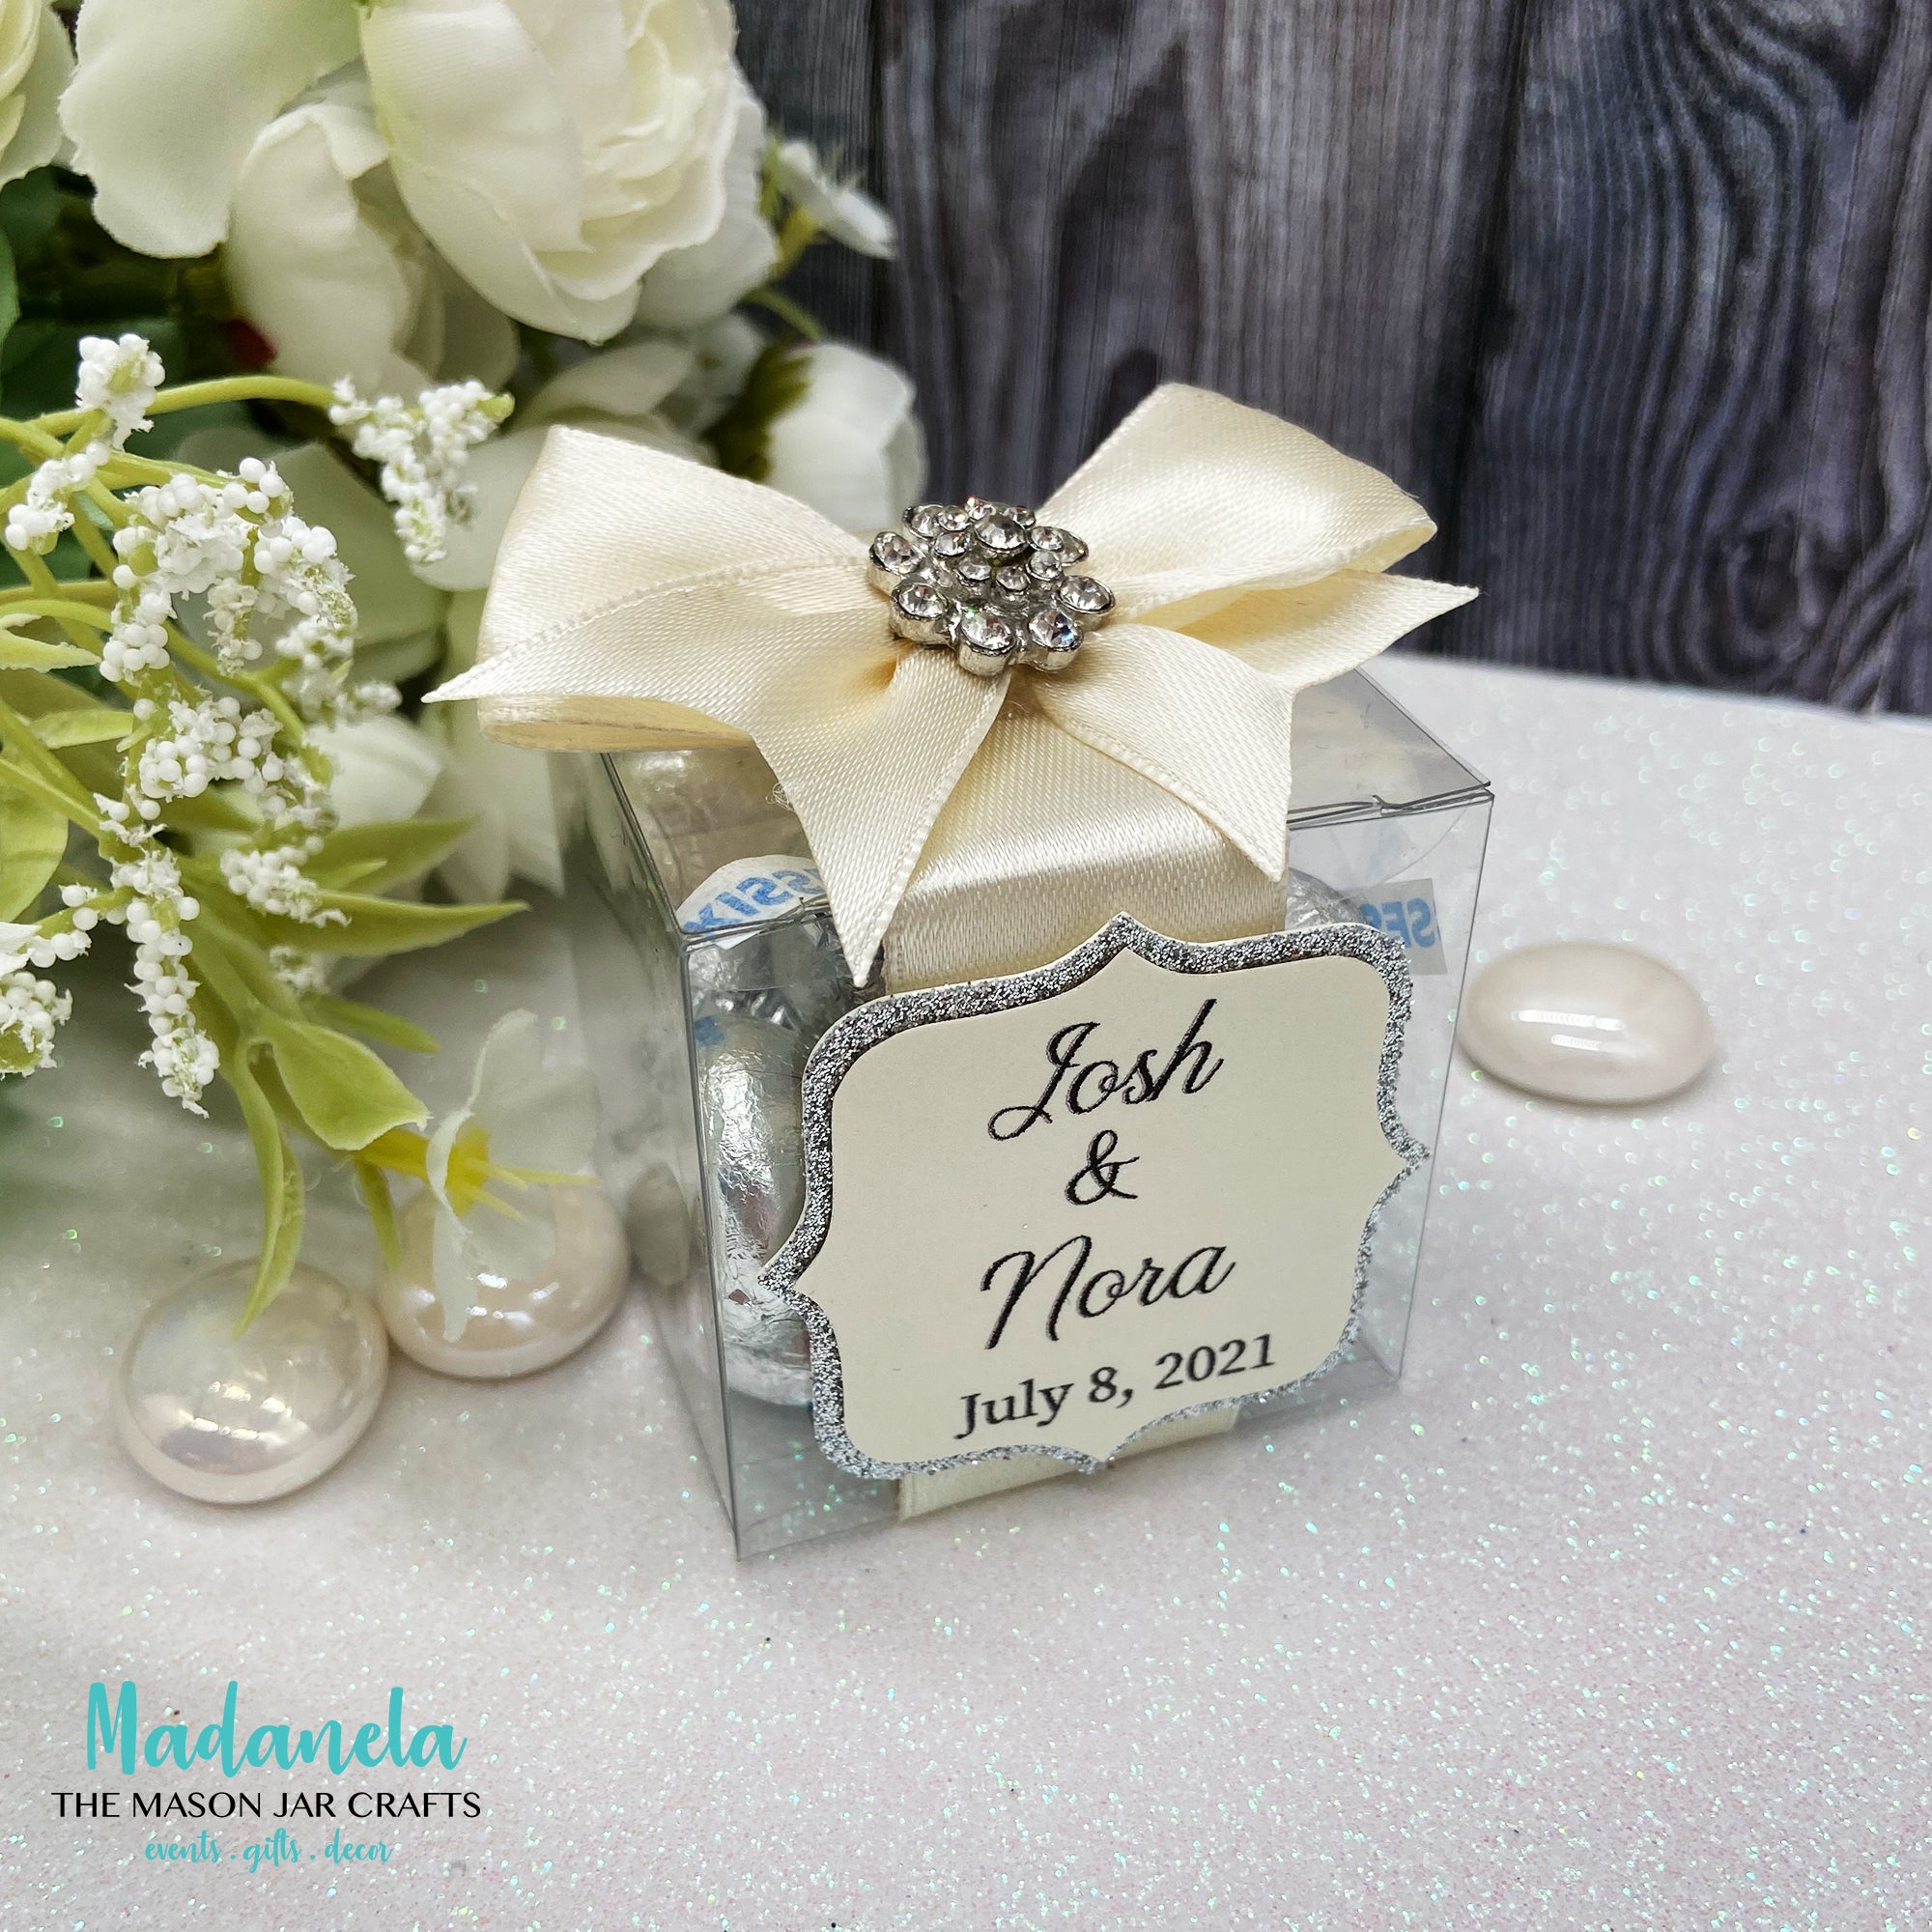 Personalized Party Favors For Your Next Event